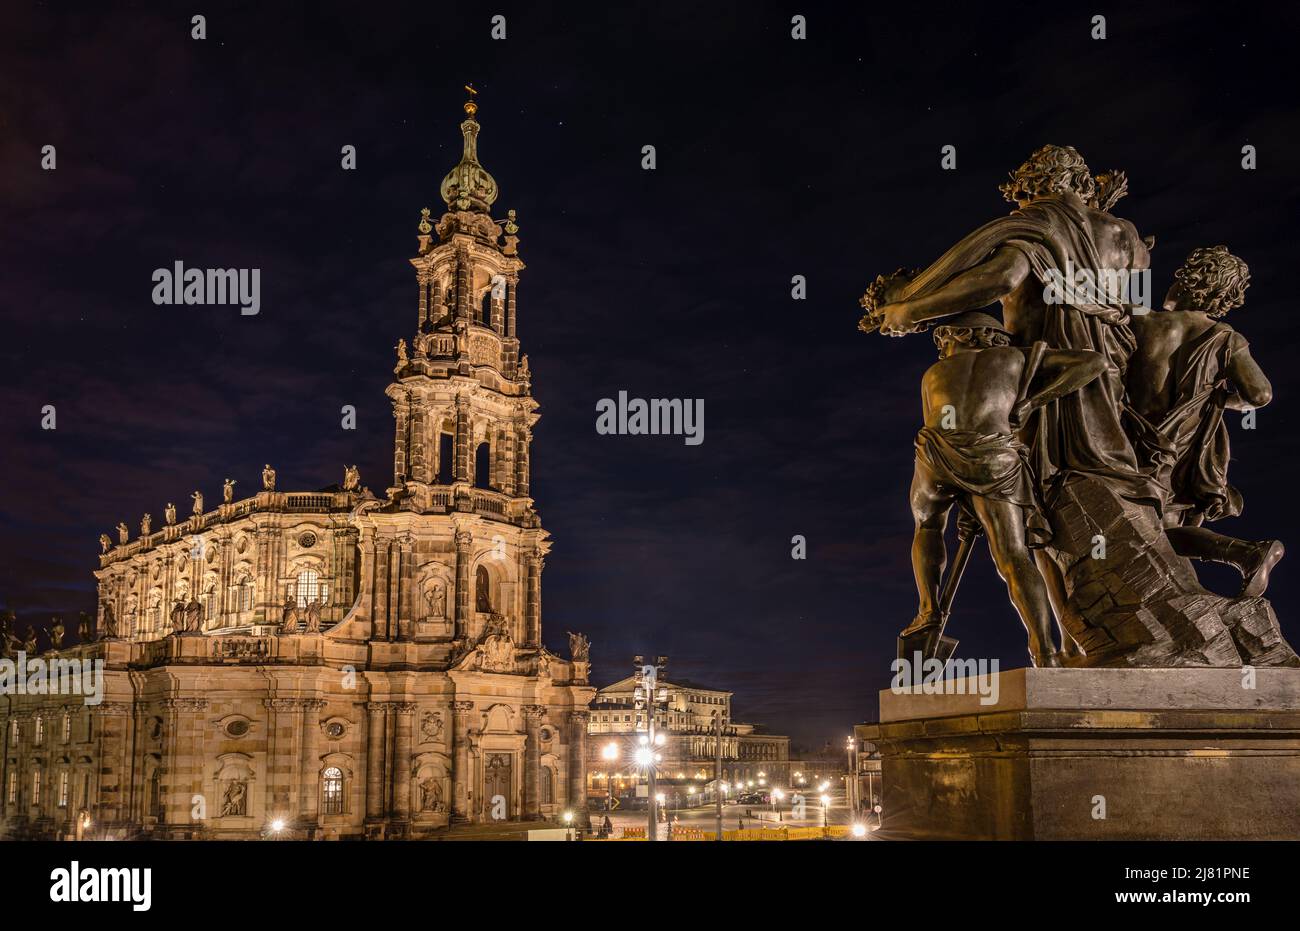 Night shot of the Dresden Hofkirche on Schlossplatz and part of the sculpture group 'Four Times of Day' by Johannes Schilling Stock Photo